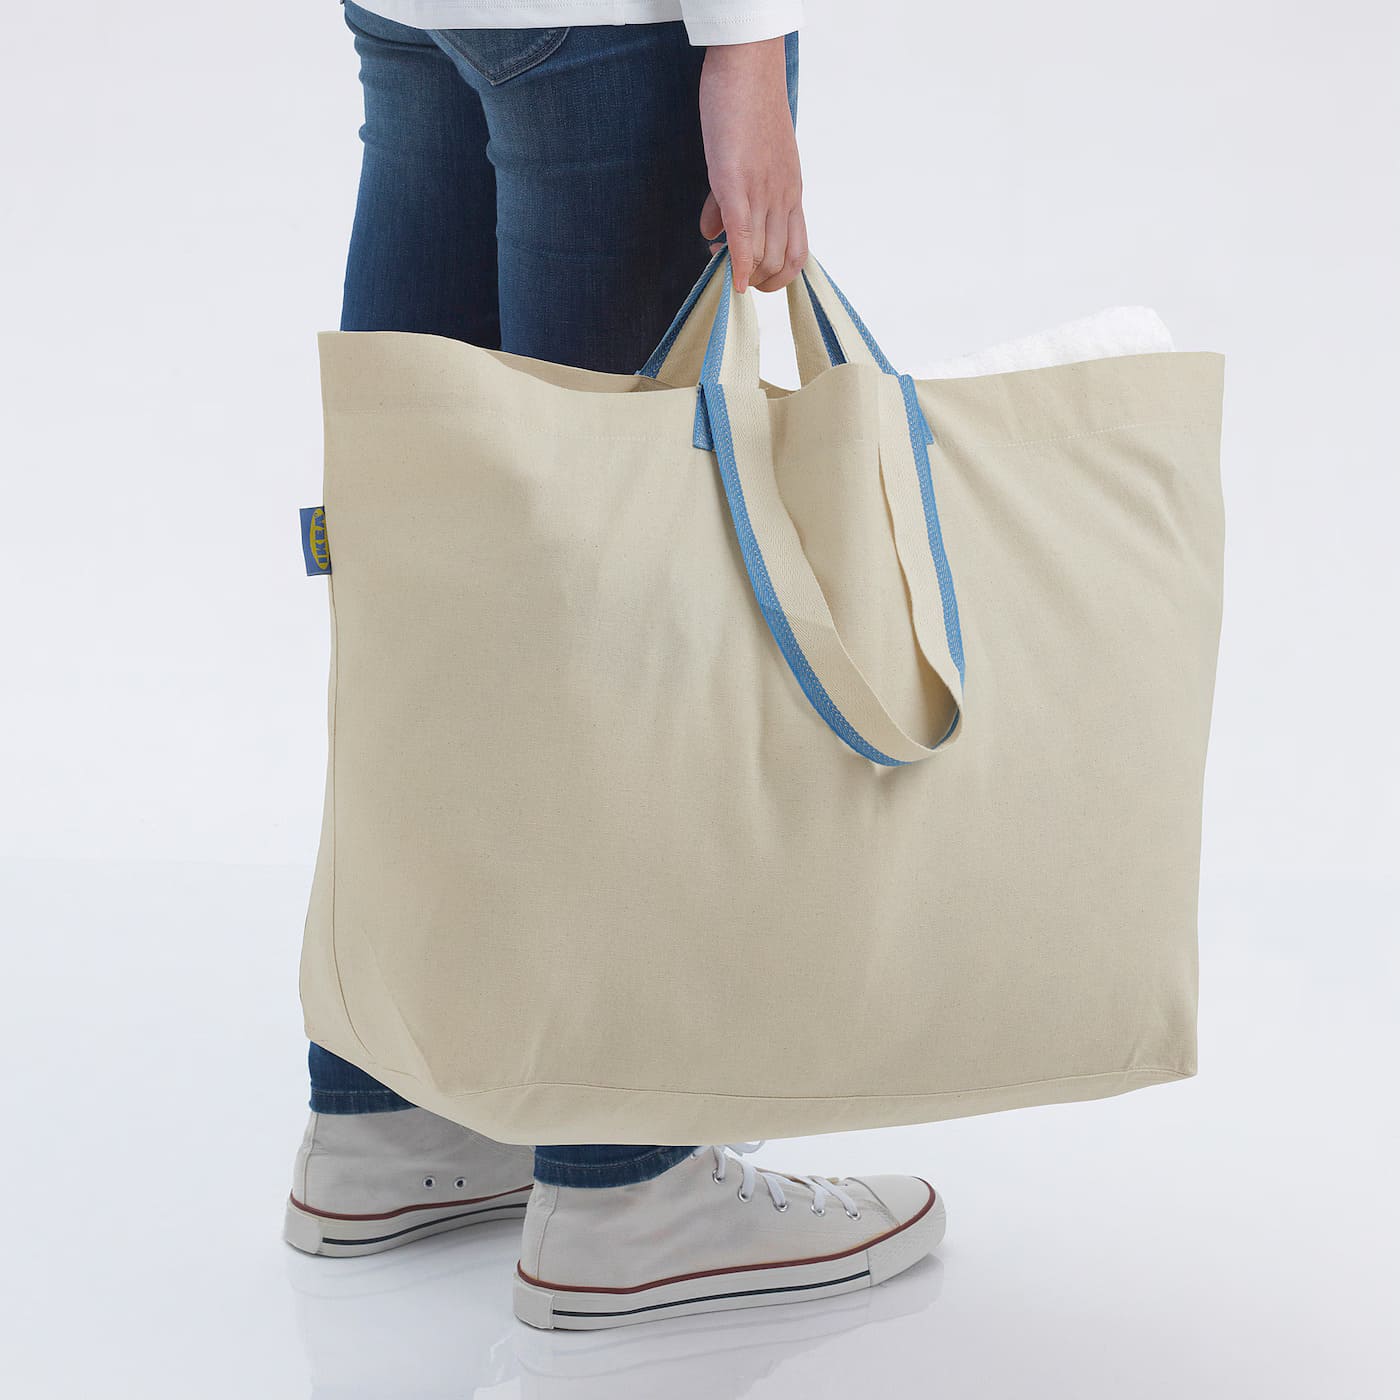 PP woven IKEA bags made of 7 kinds of environmentally friendly materials